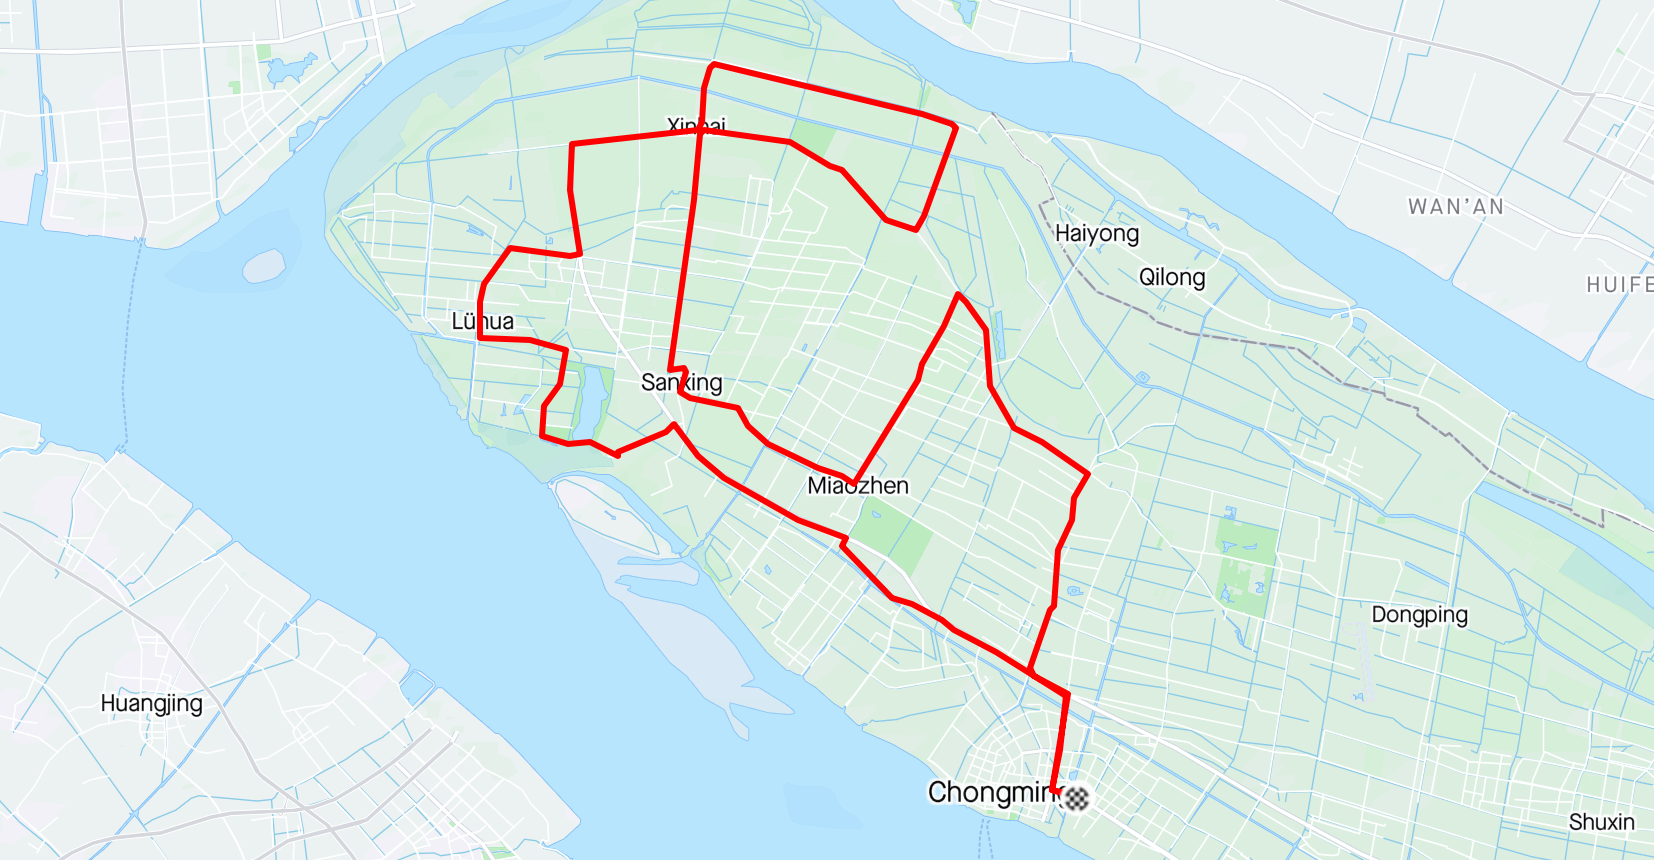 The route of stage 1 of the Tour of Chongming Island women's WorldTour race. It's a mostly flat city course with lots of corners.